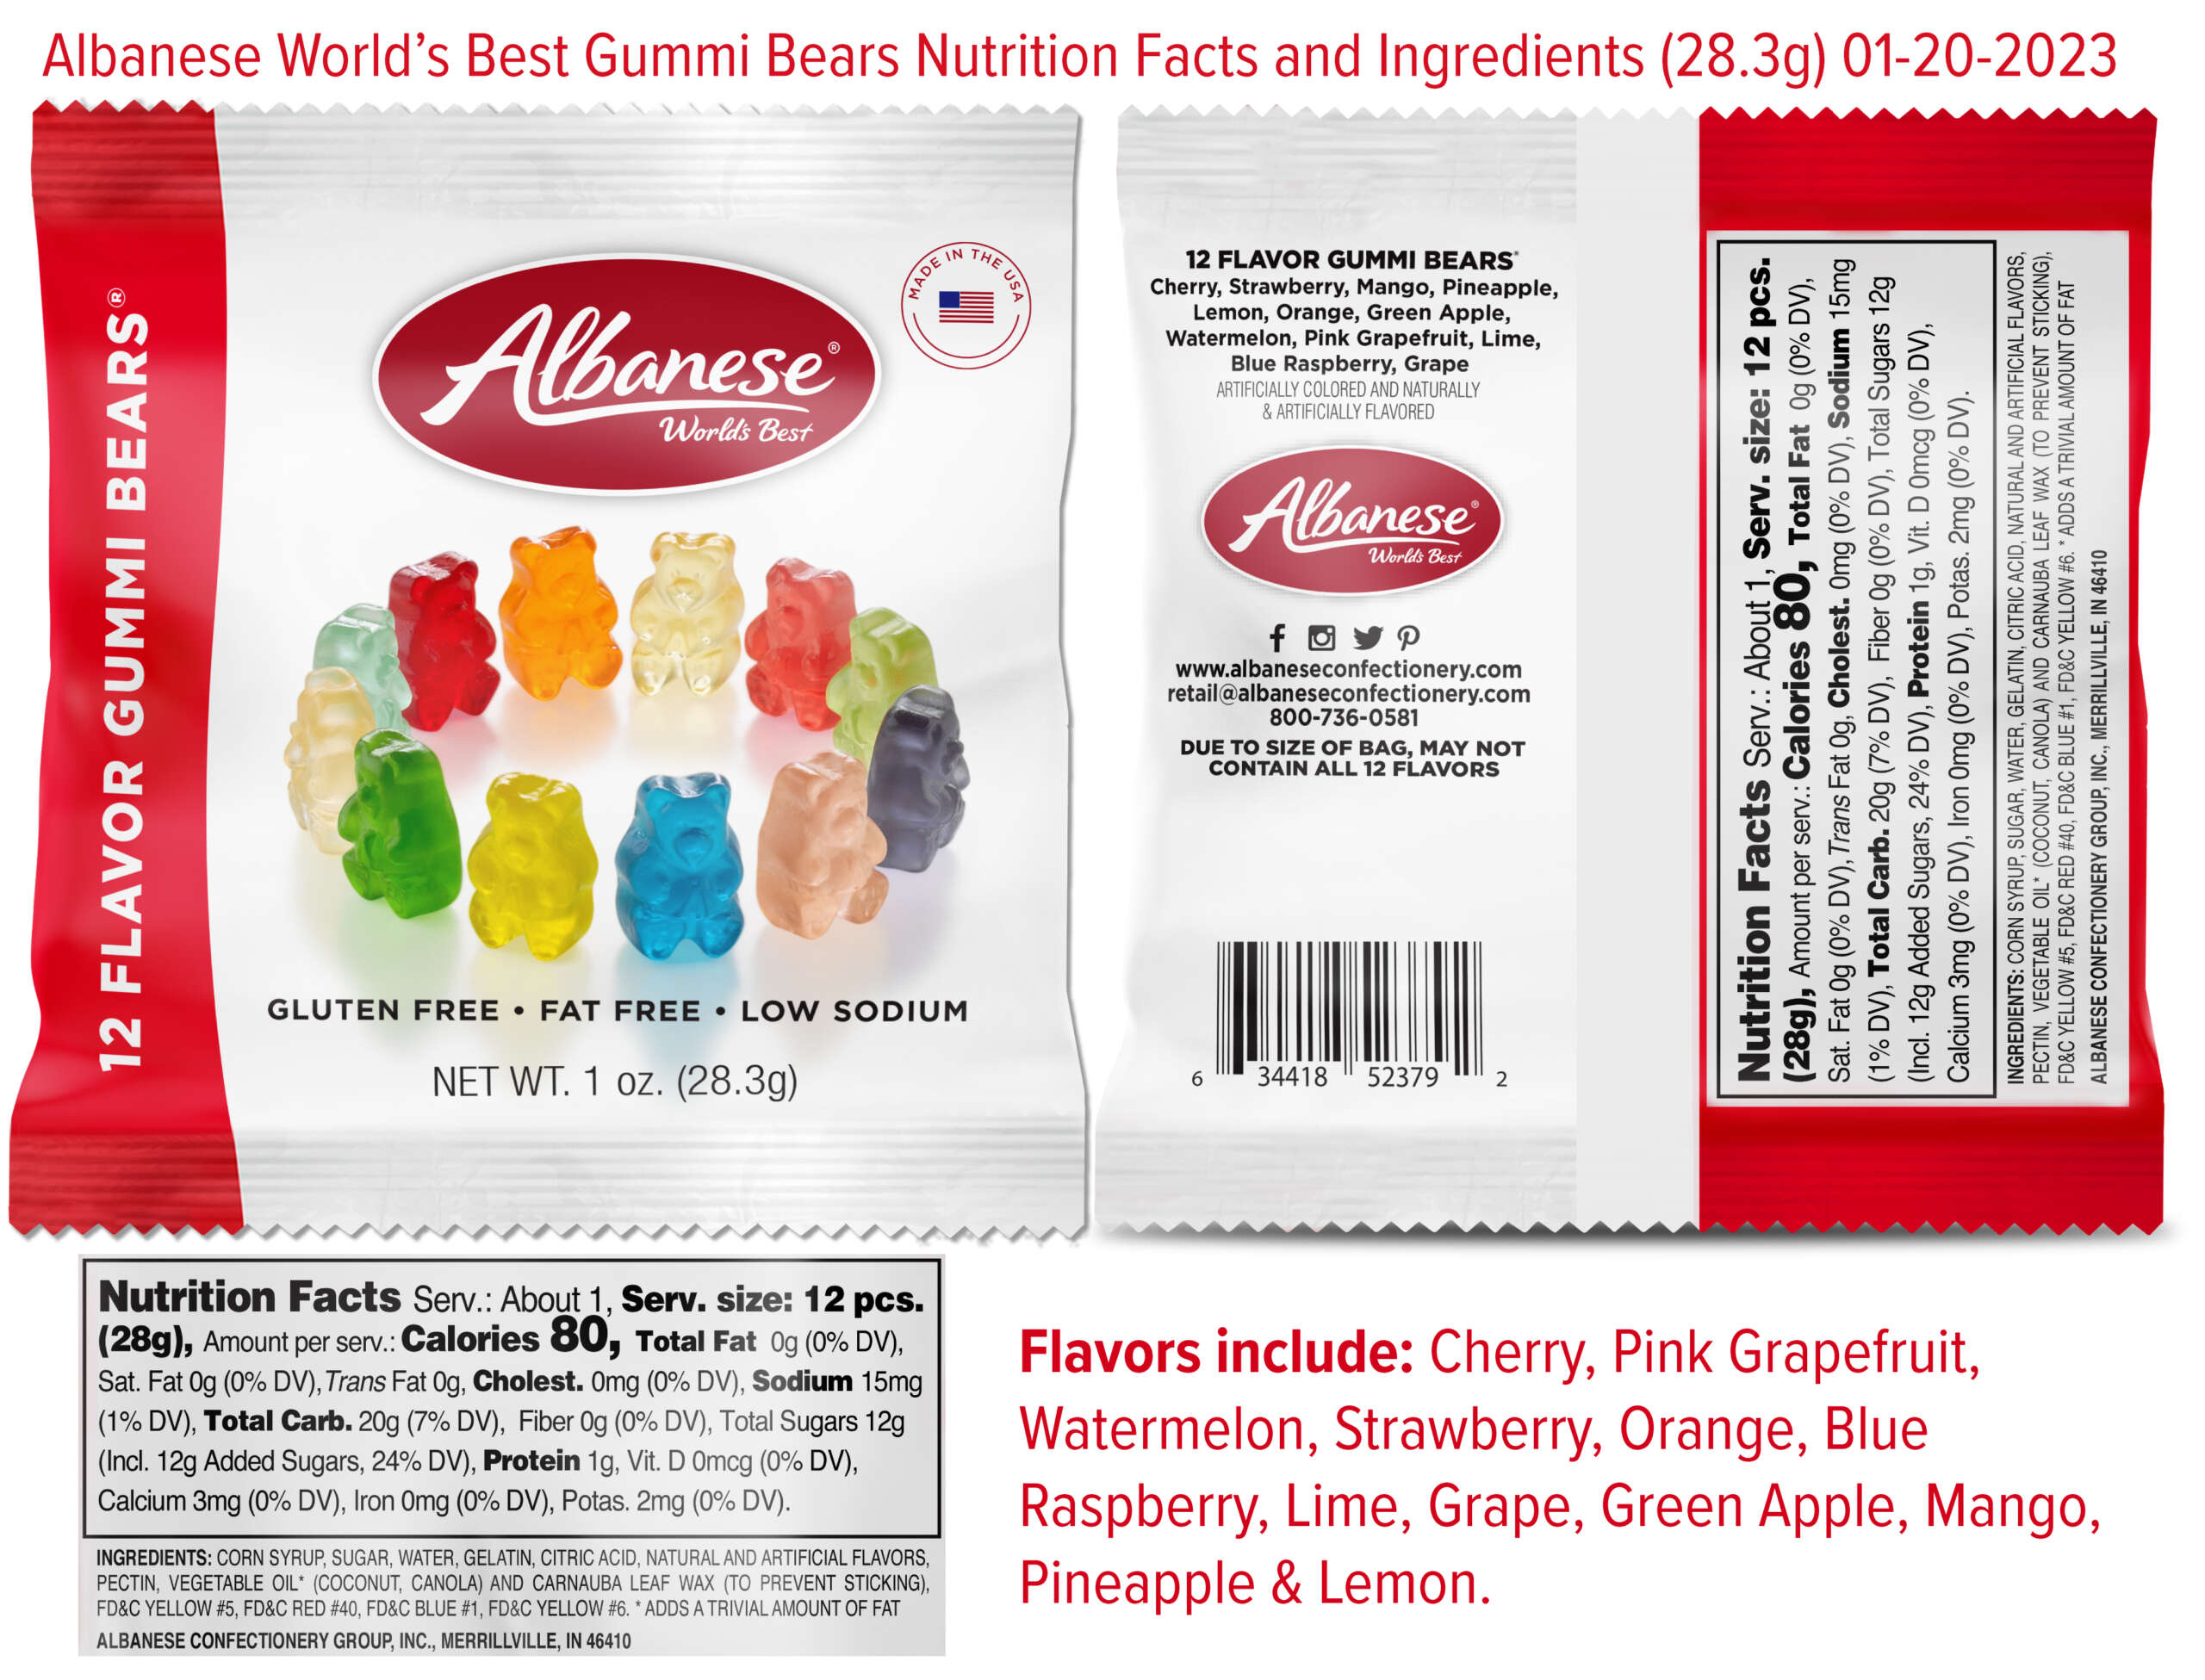 Albanese Gummi Bears Nutrition Facts and Ingredients